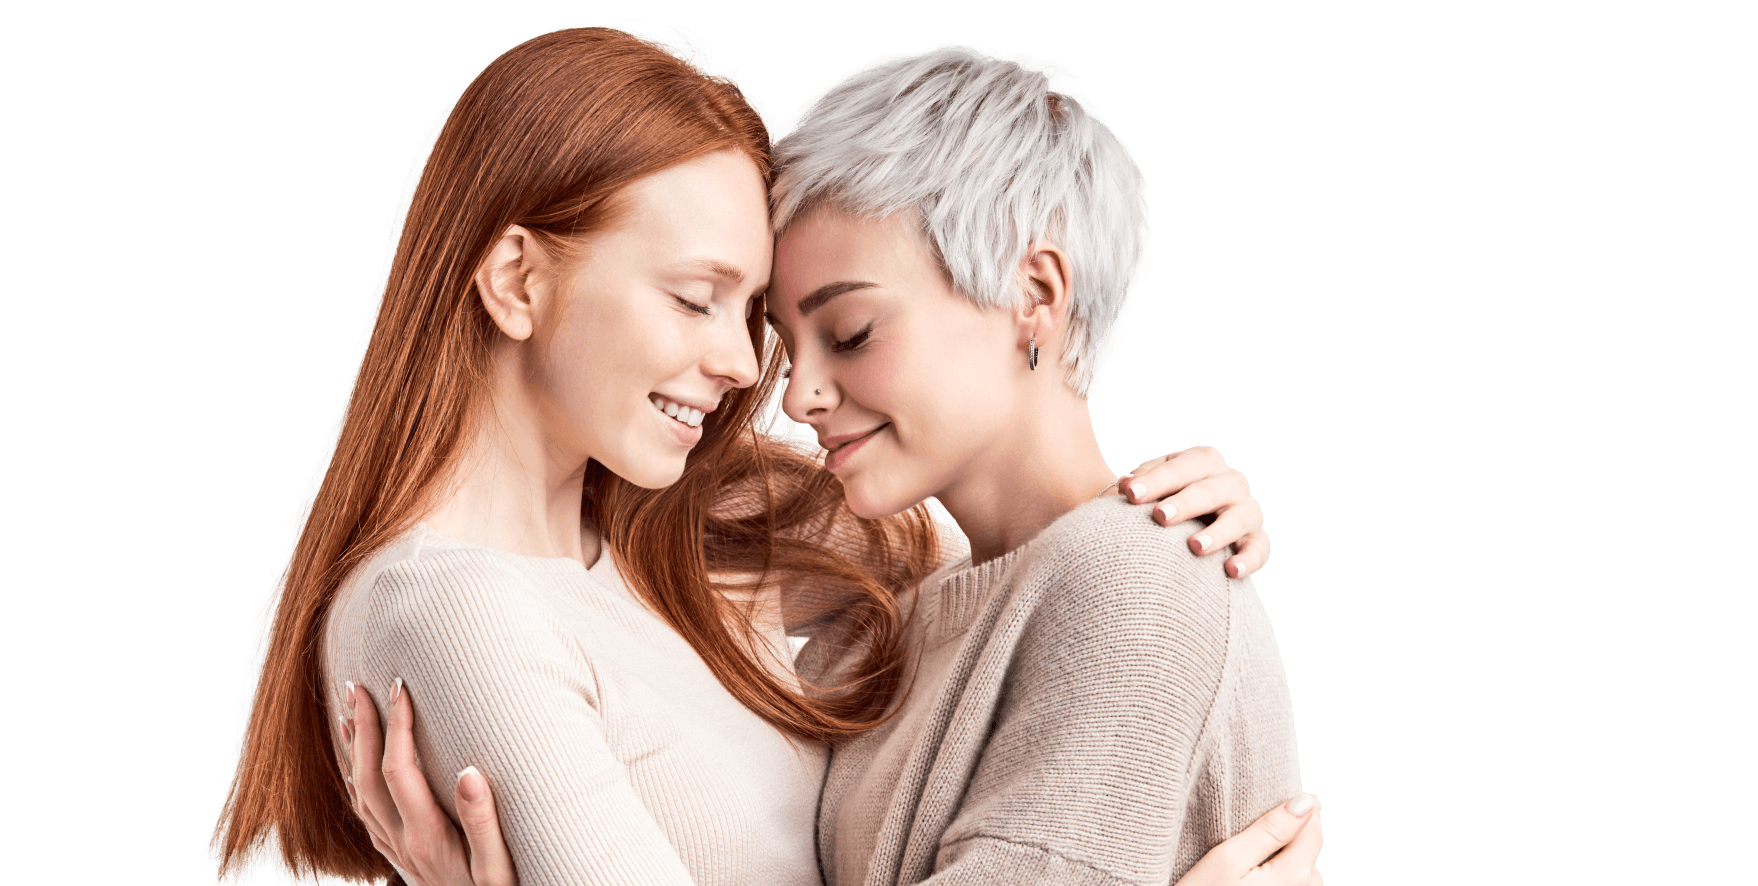 ROPA: The fertility treatment designed for the LGBTQ+ community - New year, new hope babie image